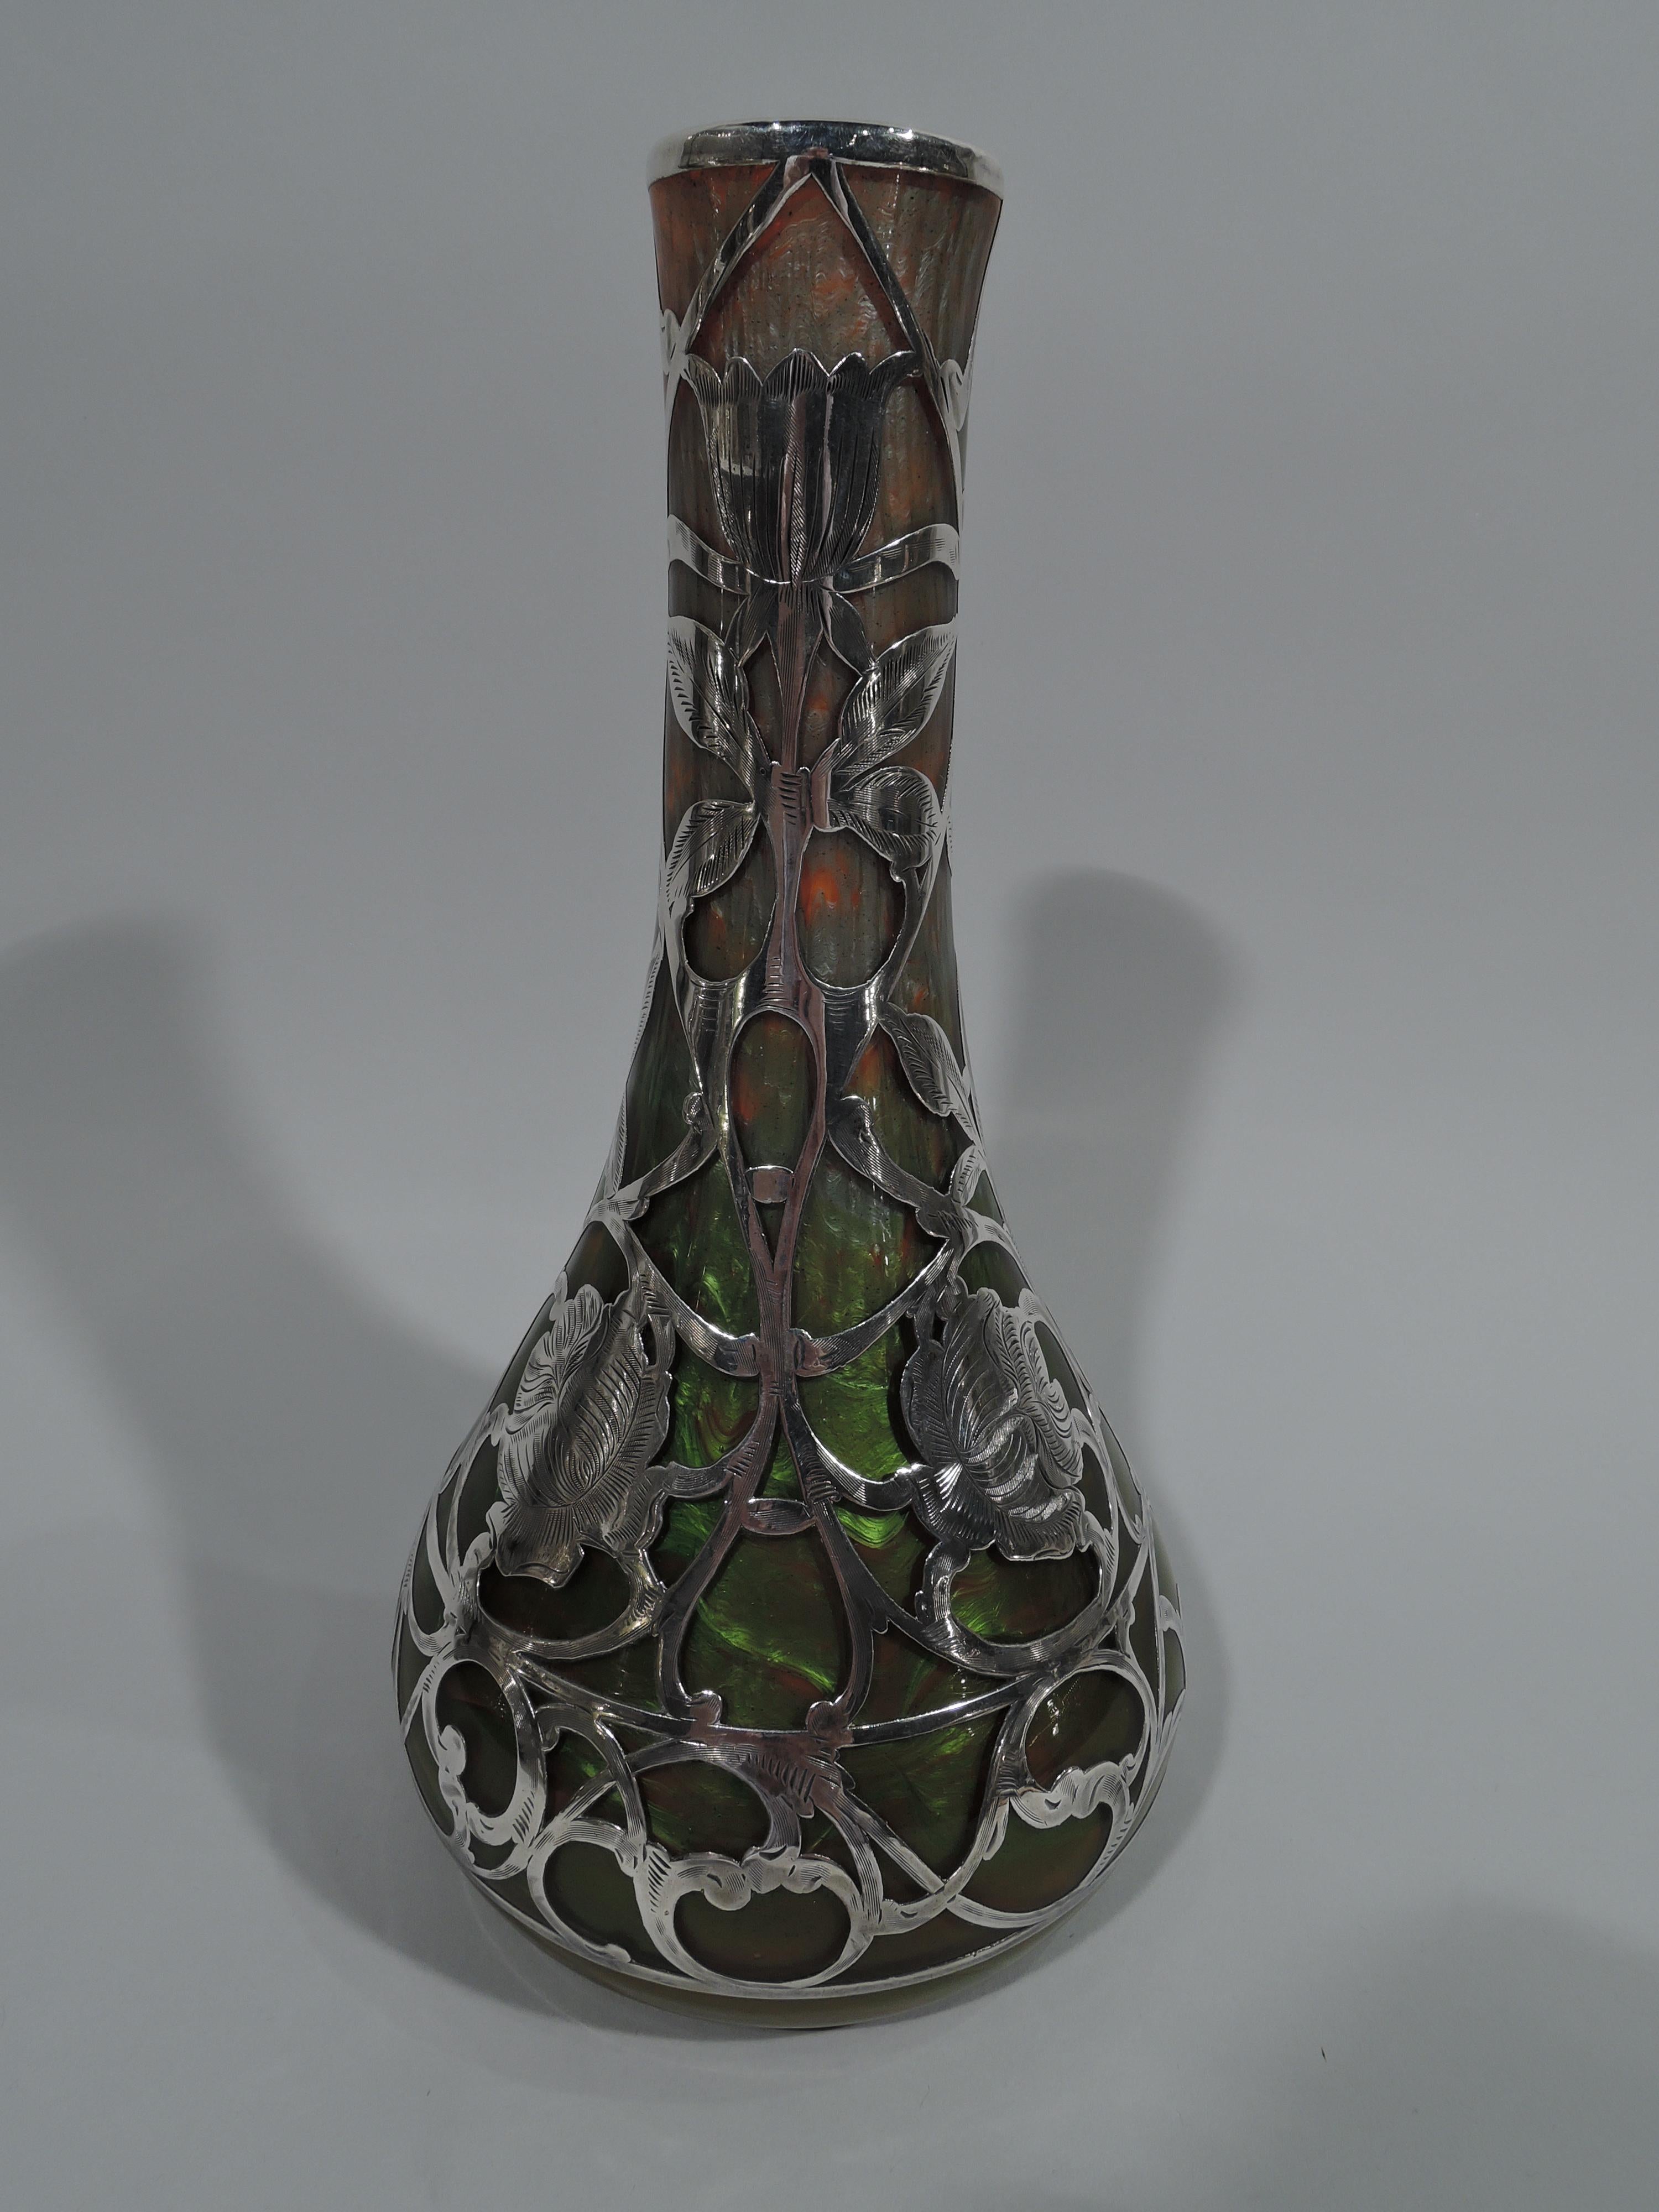 Art Nouveau iridescent glass vase in Titania pattern by historic maker Loetz, circa 1900. Conical with tall and narrow neck. Mottled and shimmering green and orange. Engraved and overlaid silver with scrolled stems and blooms. Dense and controlled.